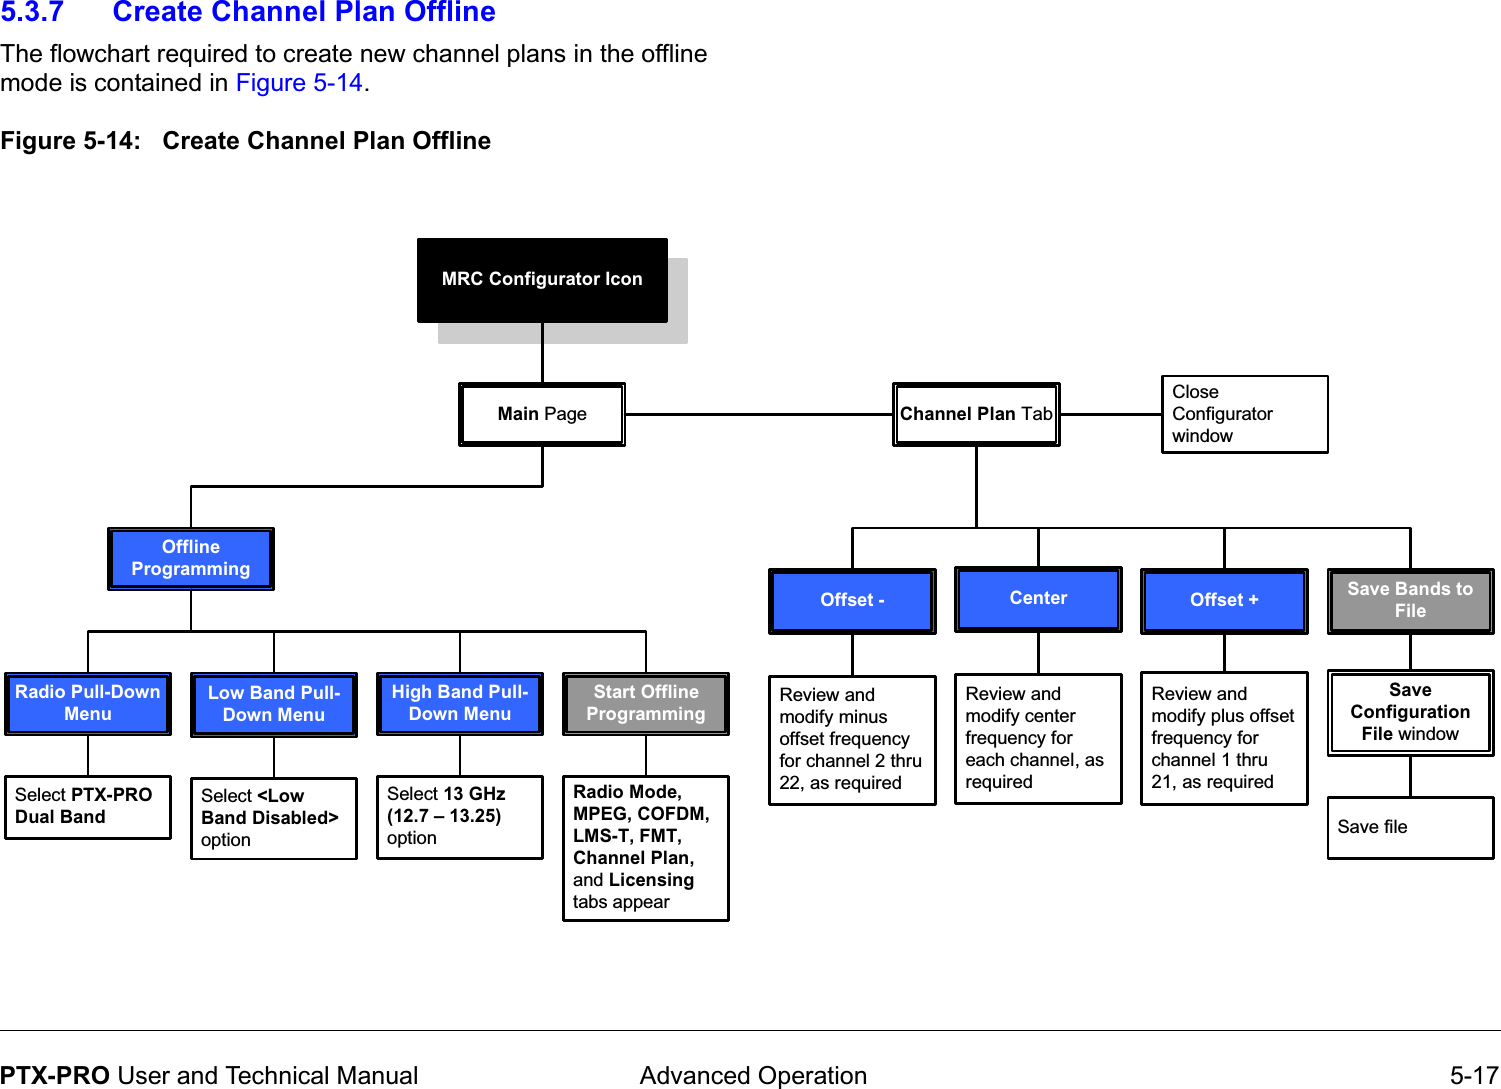  Advanced Operation 5-17PTX-PRO User and Technical Manual5.3.7 Create Channel Plan OfflineThe flowchart required to create new channel plans in the offline mode is contained in Figure 5-14.Figure 5-14:   Create Channel Plan Offline  MRC Configurator IconMain Page Channel Plan TabCenterReview and modify center frequency for each channel, as requiredLow Band Pull-Down MenuSelect &lt;Low Band Disabled&gt; optionClose Configurator windowStart Offline ProgrammingOffset +Review and modify plus offset frequency for channel 1 thru 21, as requiredOffset -Review and modify minus offset frequency for channel 2 thru 22, as requiredOffline ProgrammingRadio Pull-Down MenuSelect PTX-PRO Dual BandSave Bands to FileRadio Mode, MPEG, COFDM, LMS-T, FMT, Channel Plan, and Licensing tabs appearSave Configuration File windowSave fileHigh Band Pull-Down MenuSelect 13 GHz (12.7 – 13.25) option